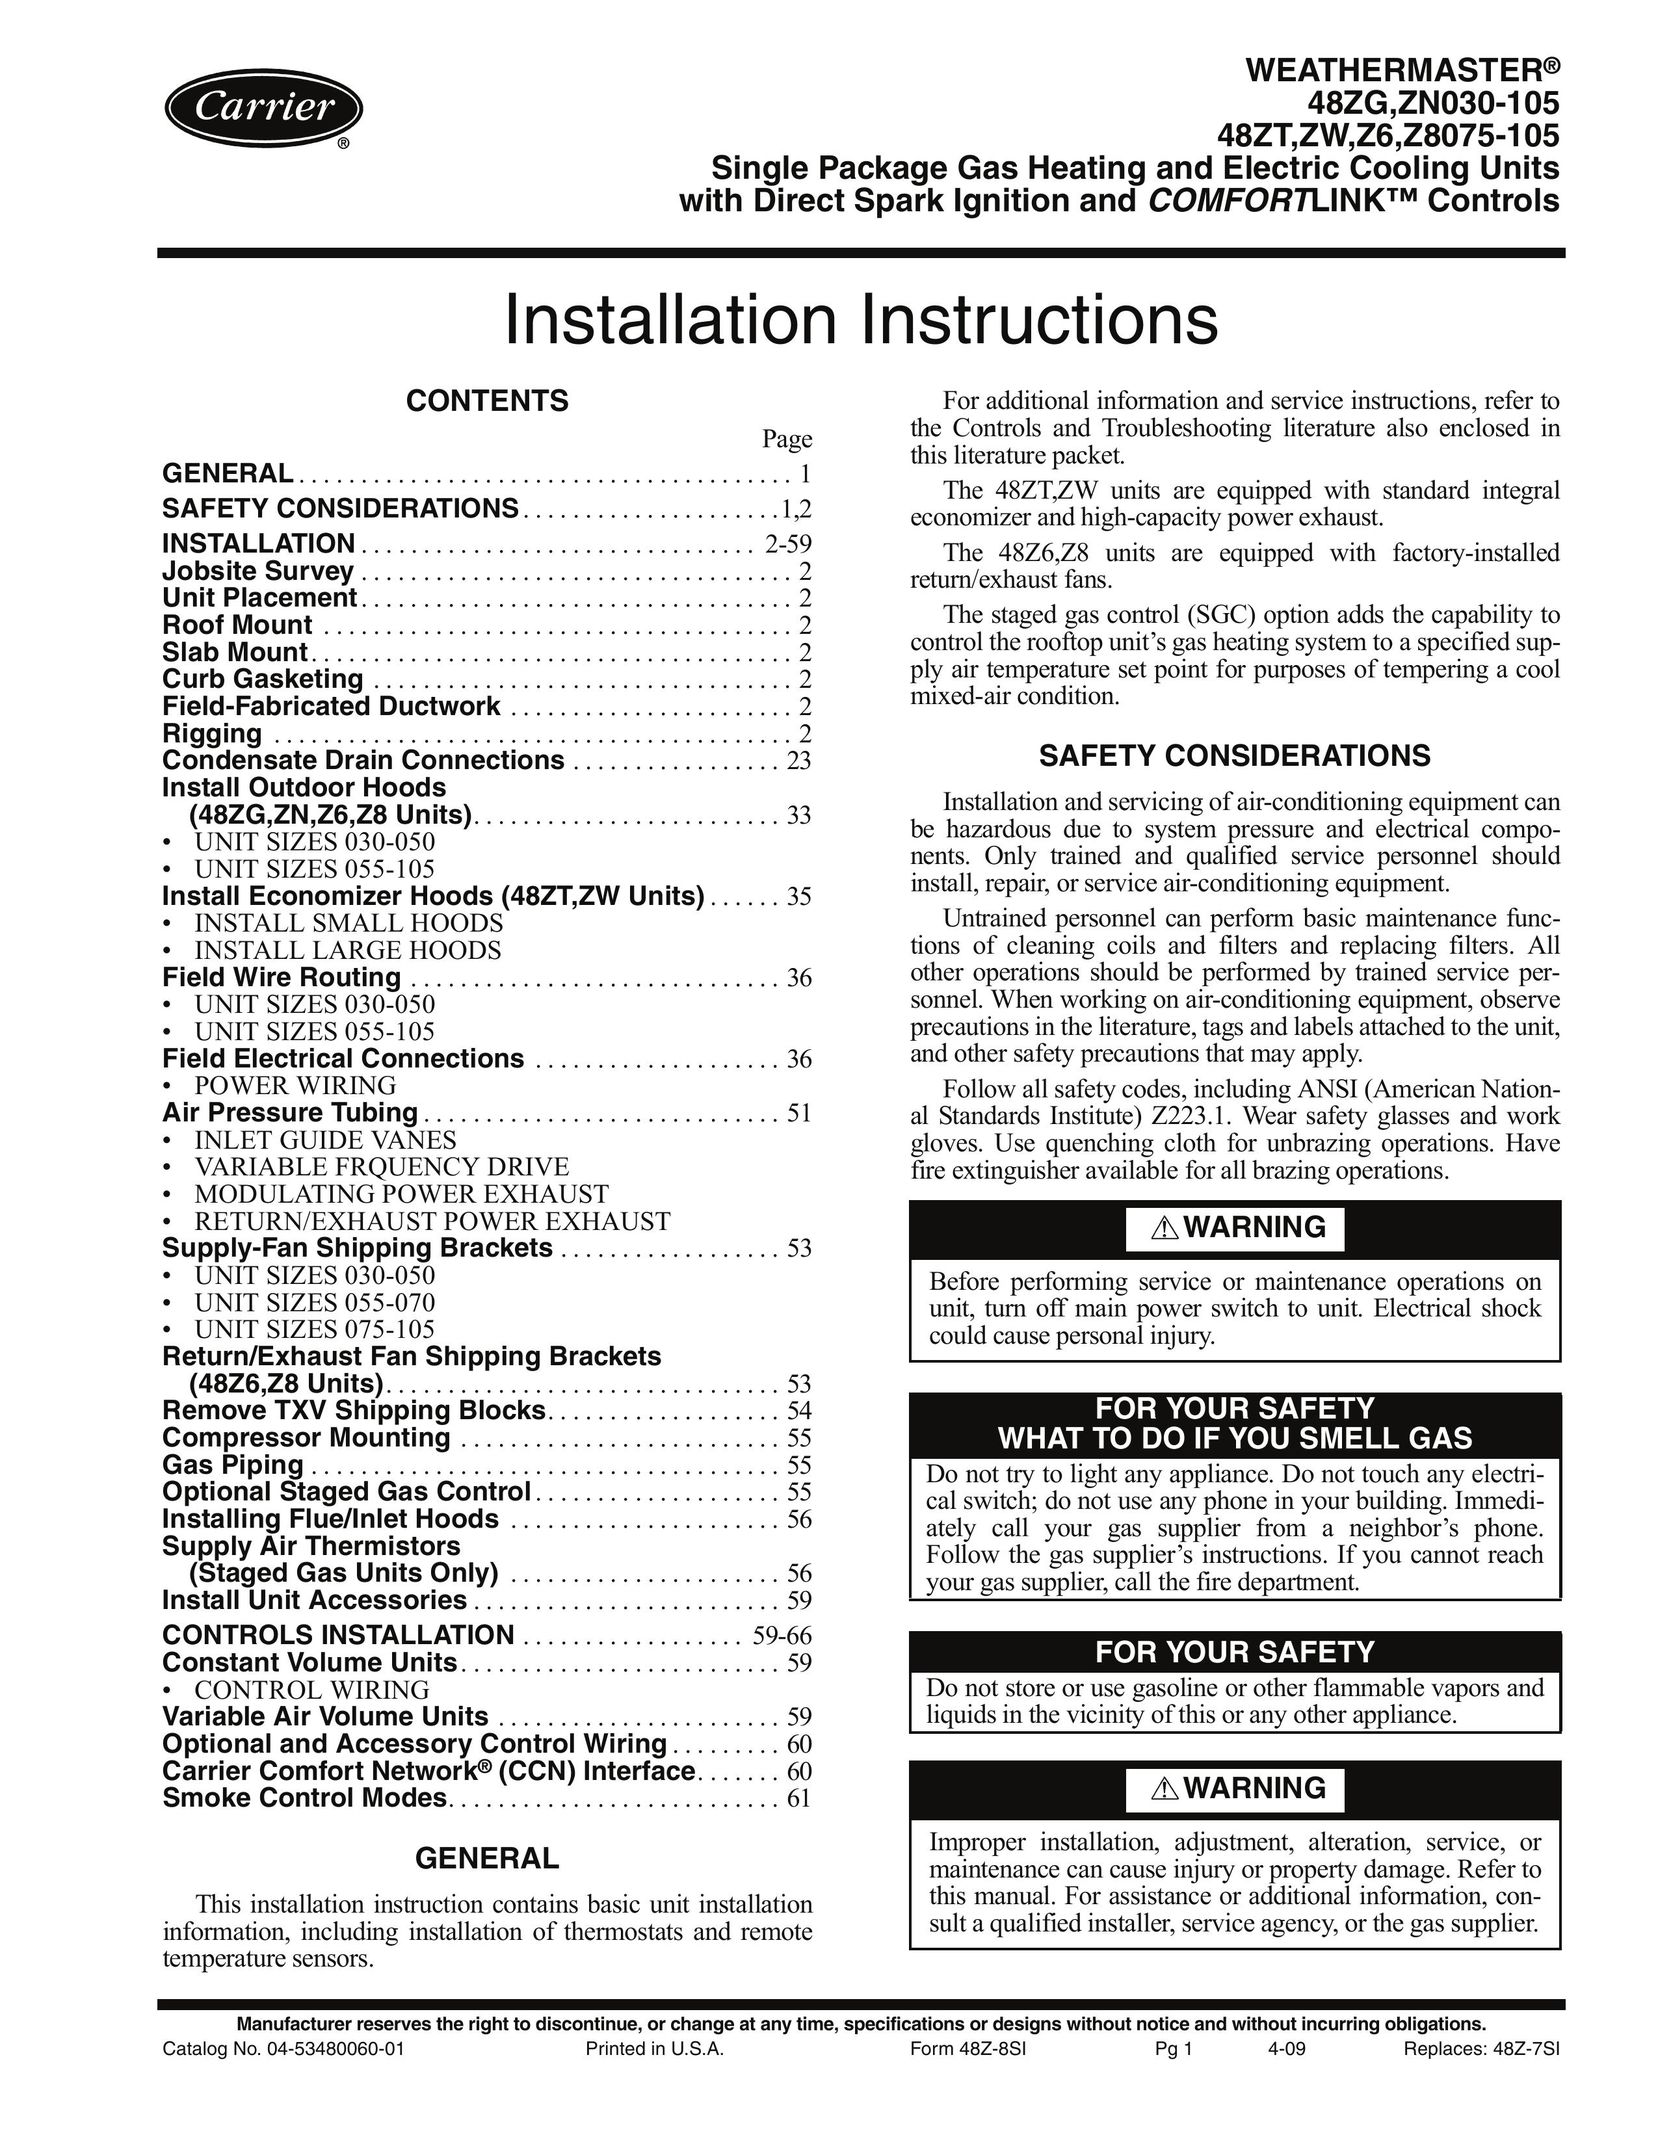 Carrier 48ZG Heating System User Manual